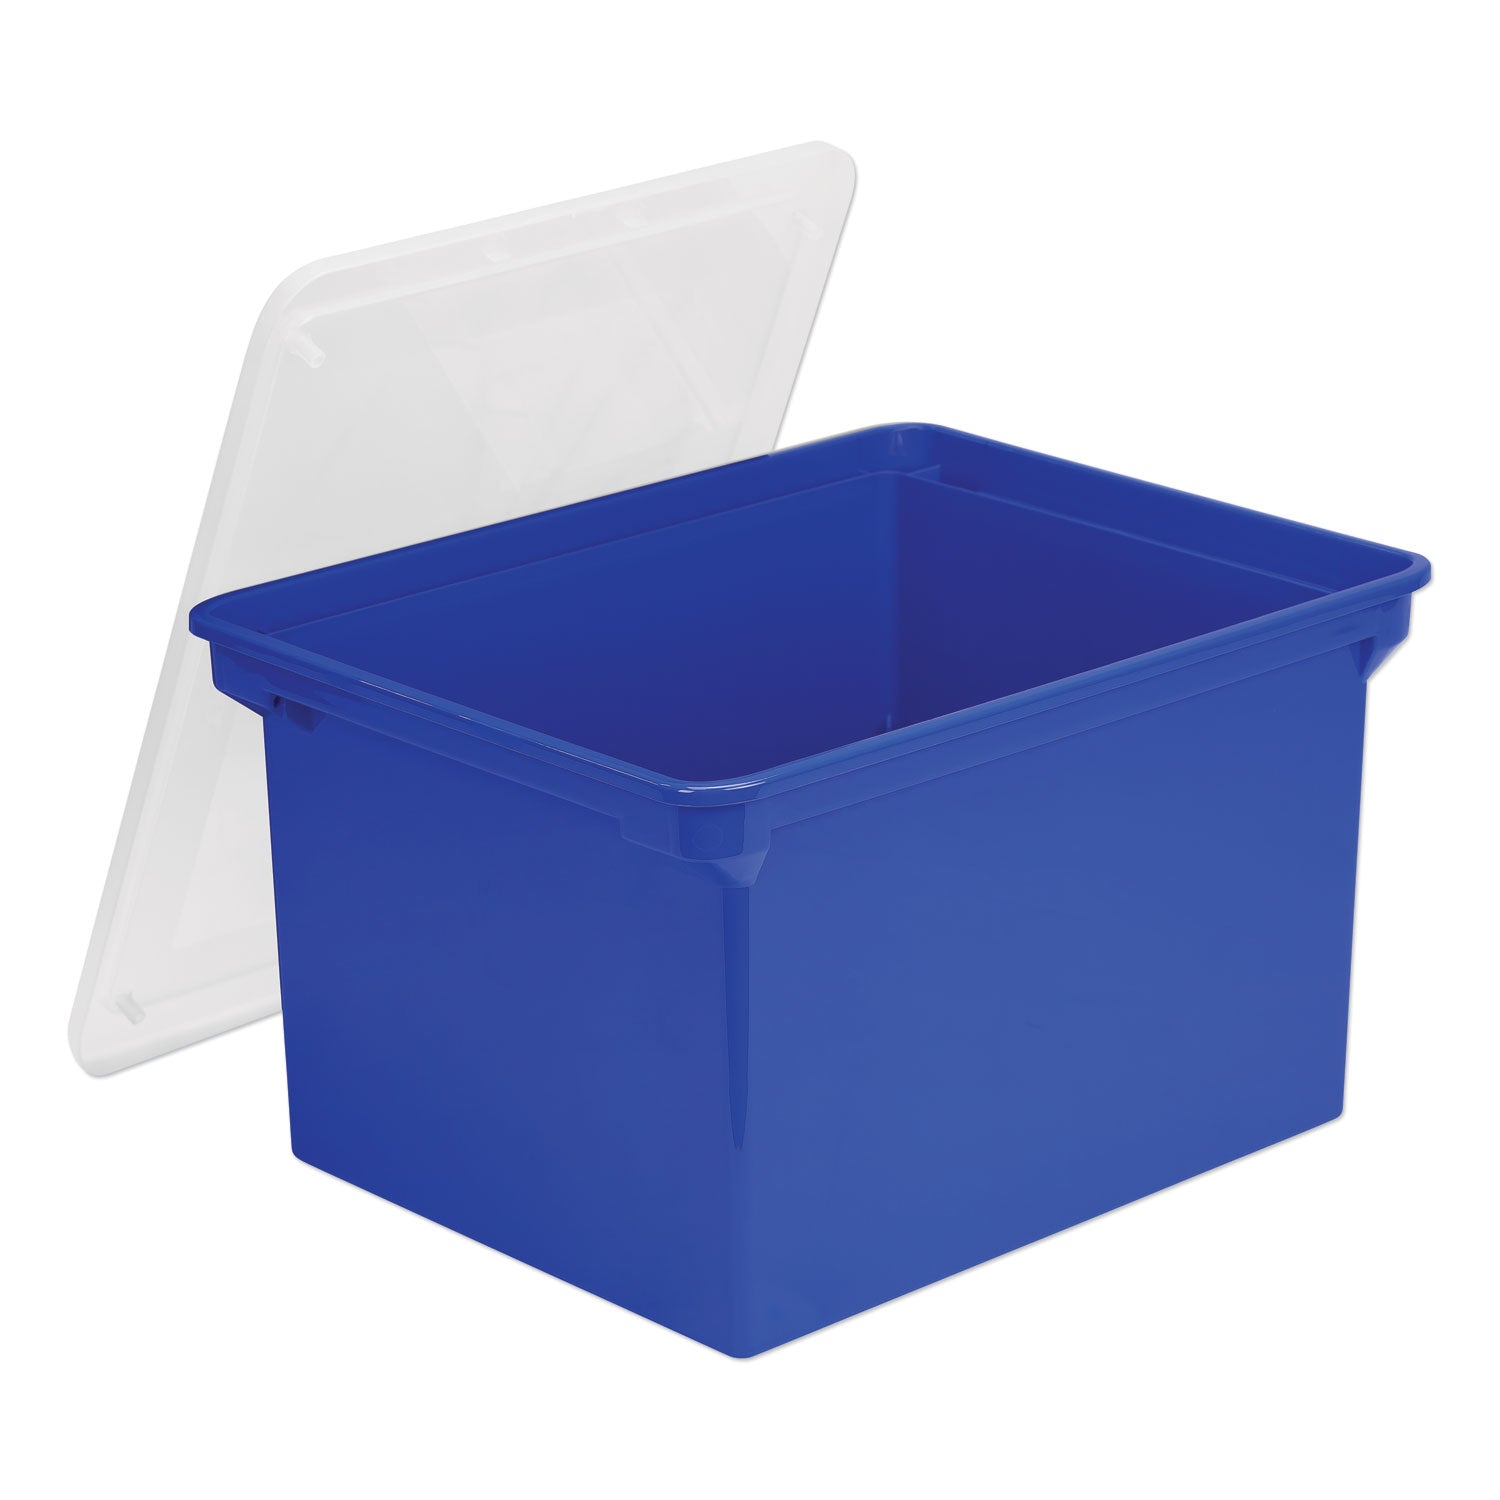 Plastic File Tote, Letter/Legal Files, 18.5" x 14.25" x 10.88", Blue/Clear - 